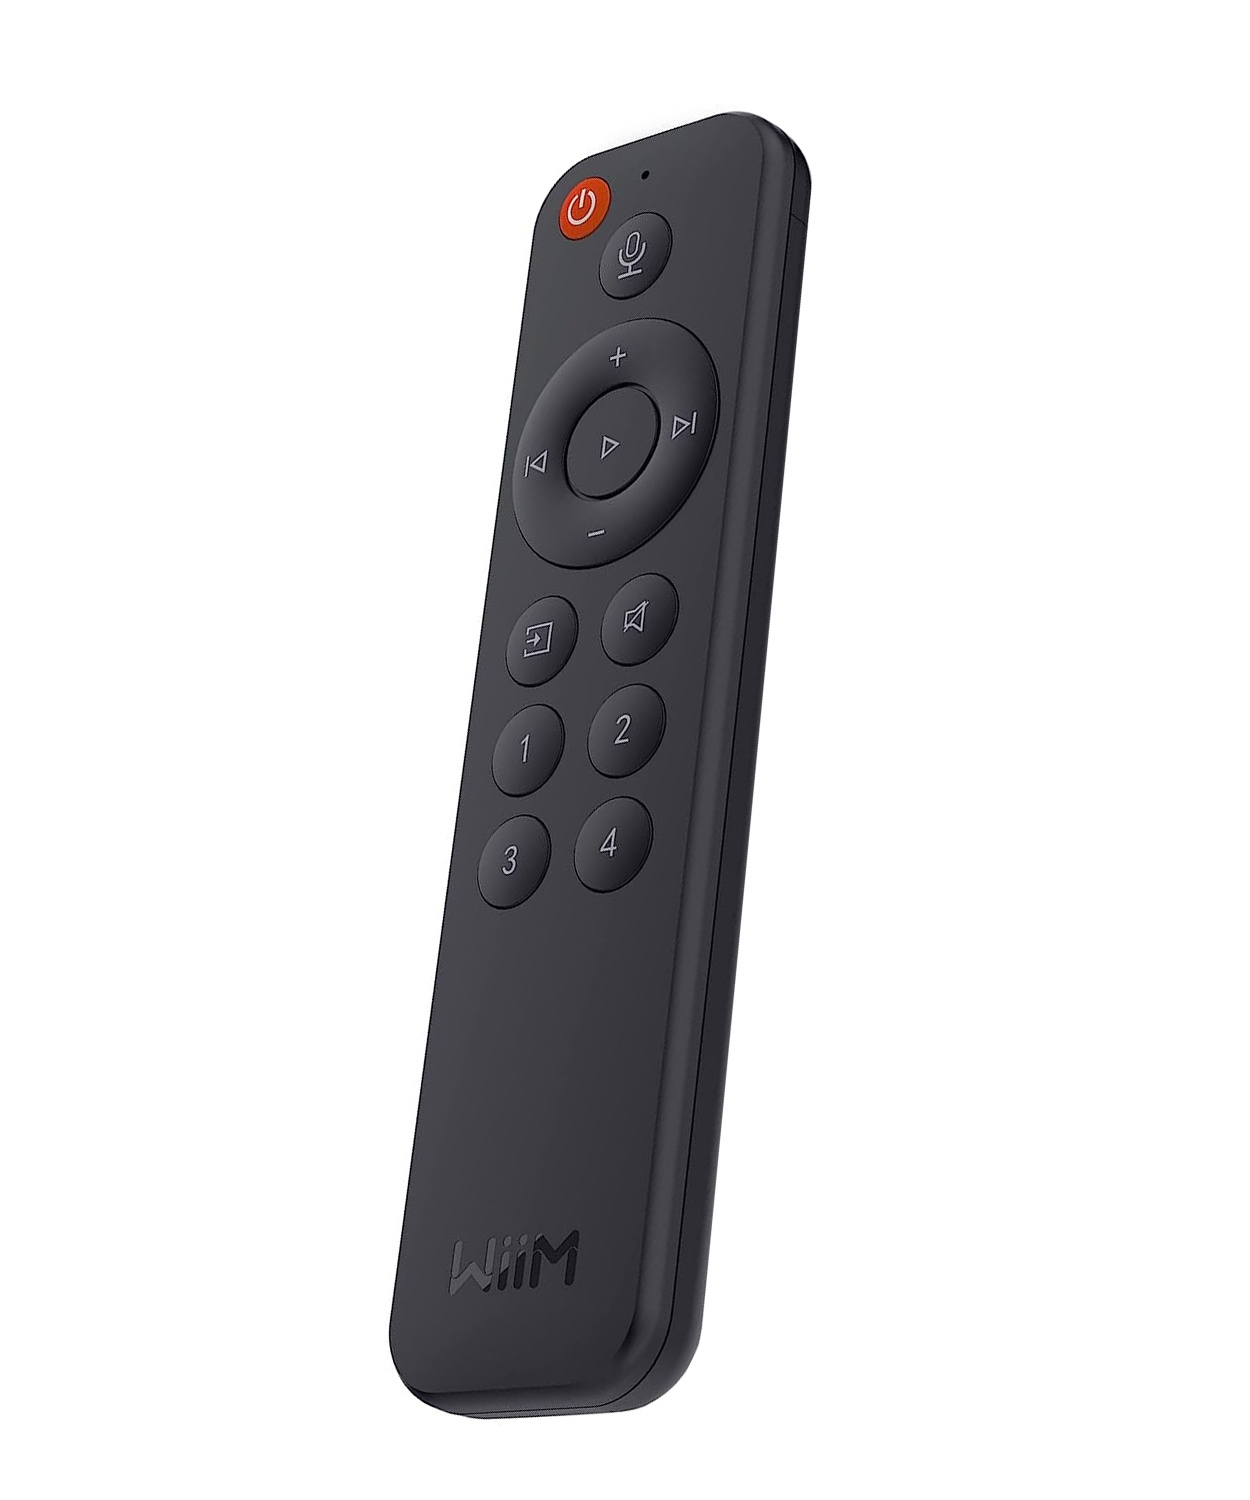 Order the WiiM Voice Remote for WiiM Mini and Pro - SoundImports